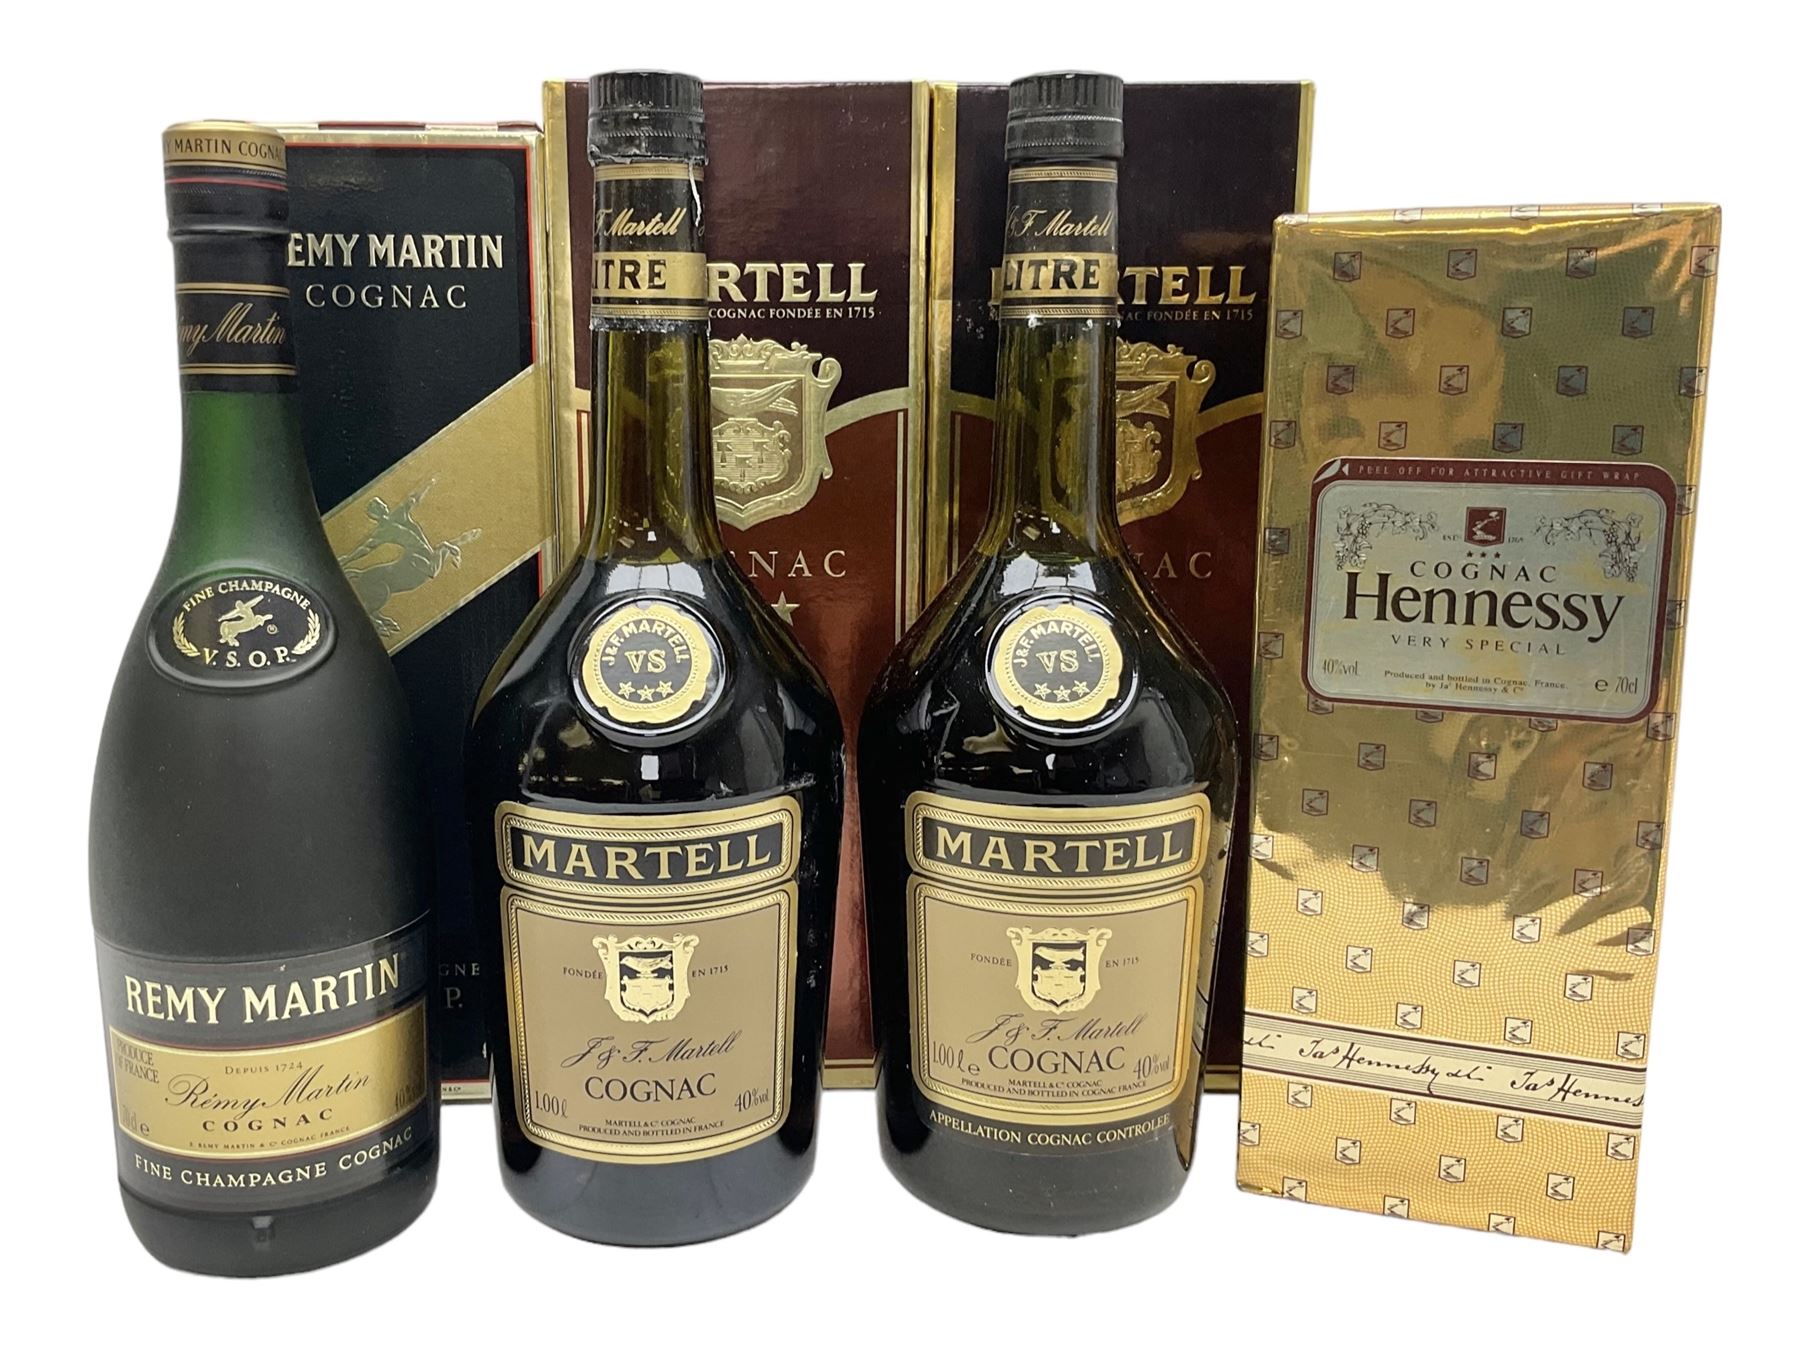 Hennessy Very Special Cognac, 70cl 40% vol, one bottle, in presentation  gift wrap box, Martell